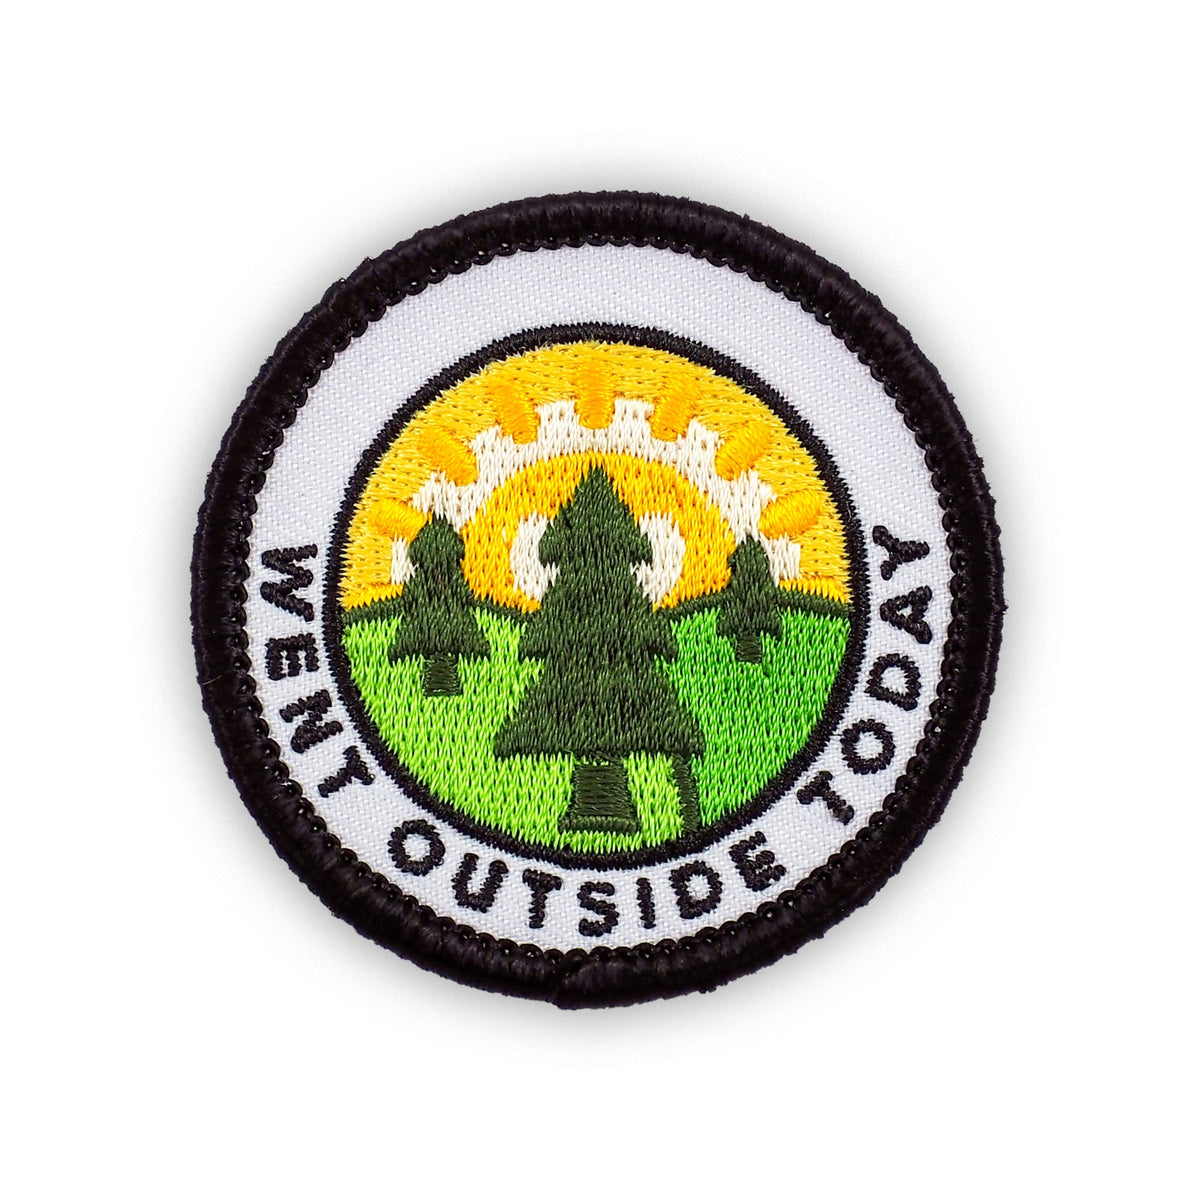 Went Outside Today individual adulting merit badge patch for adults